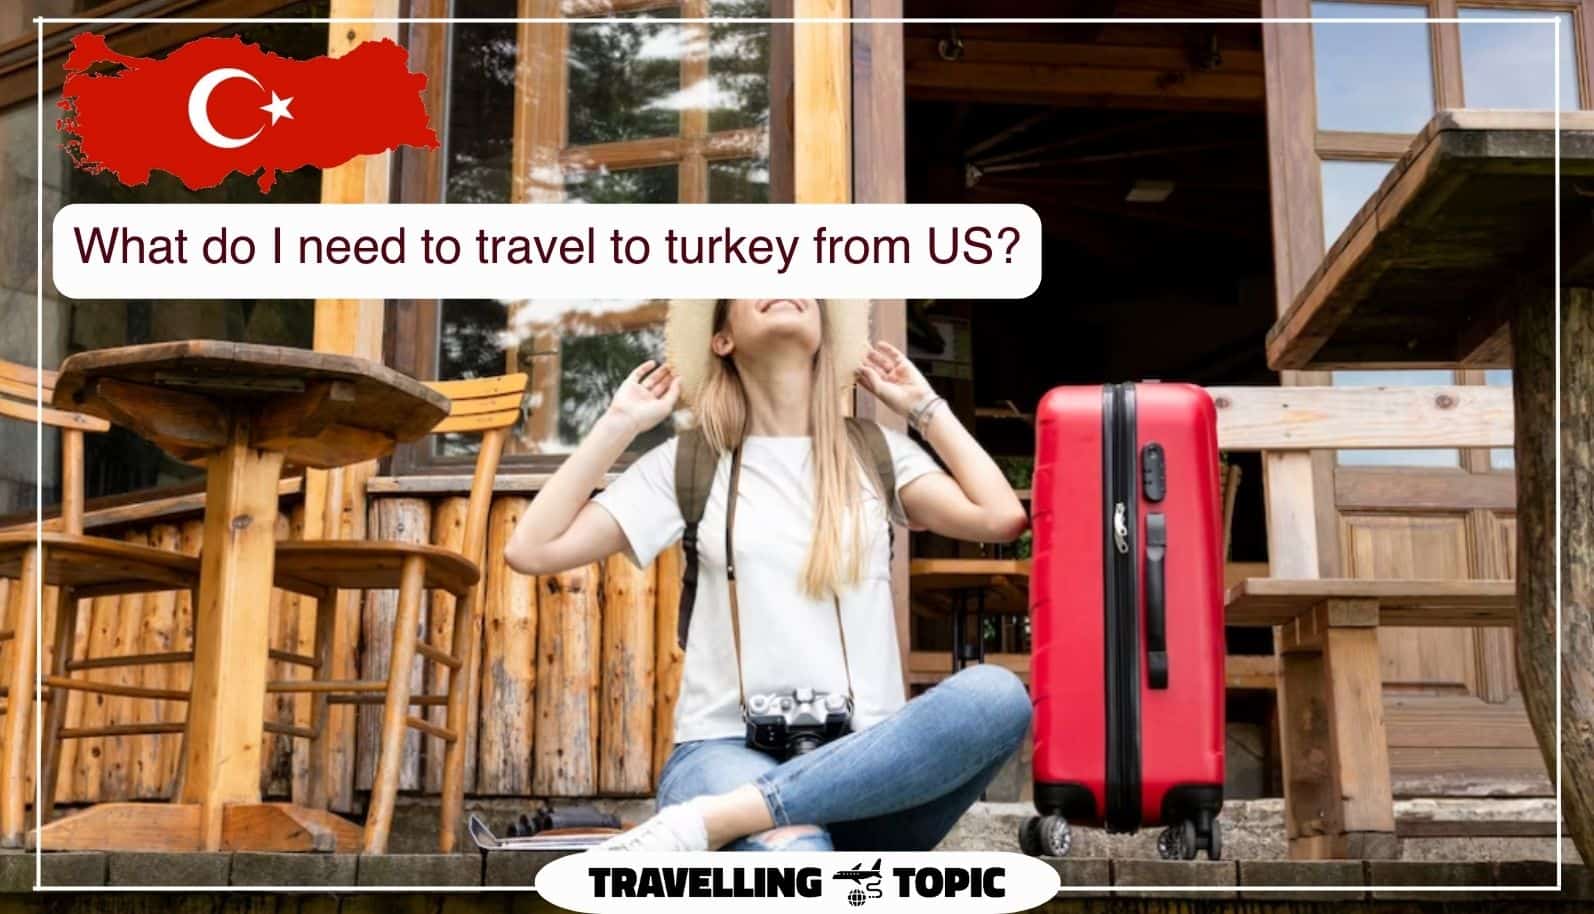 What I need to travel to turkey from USA